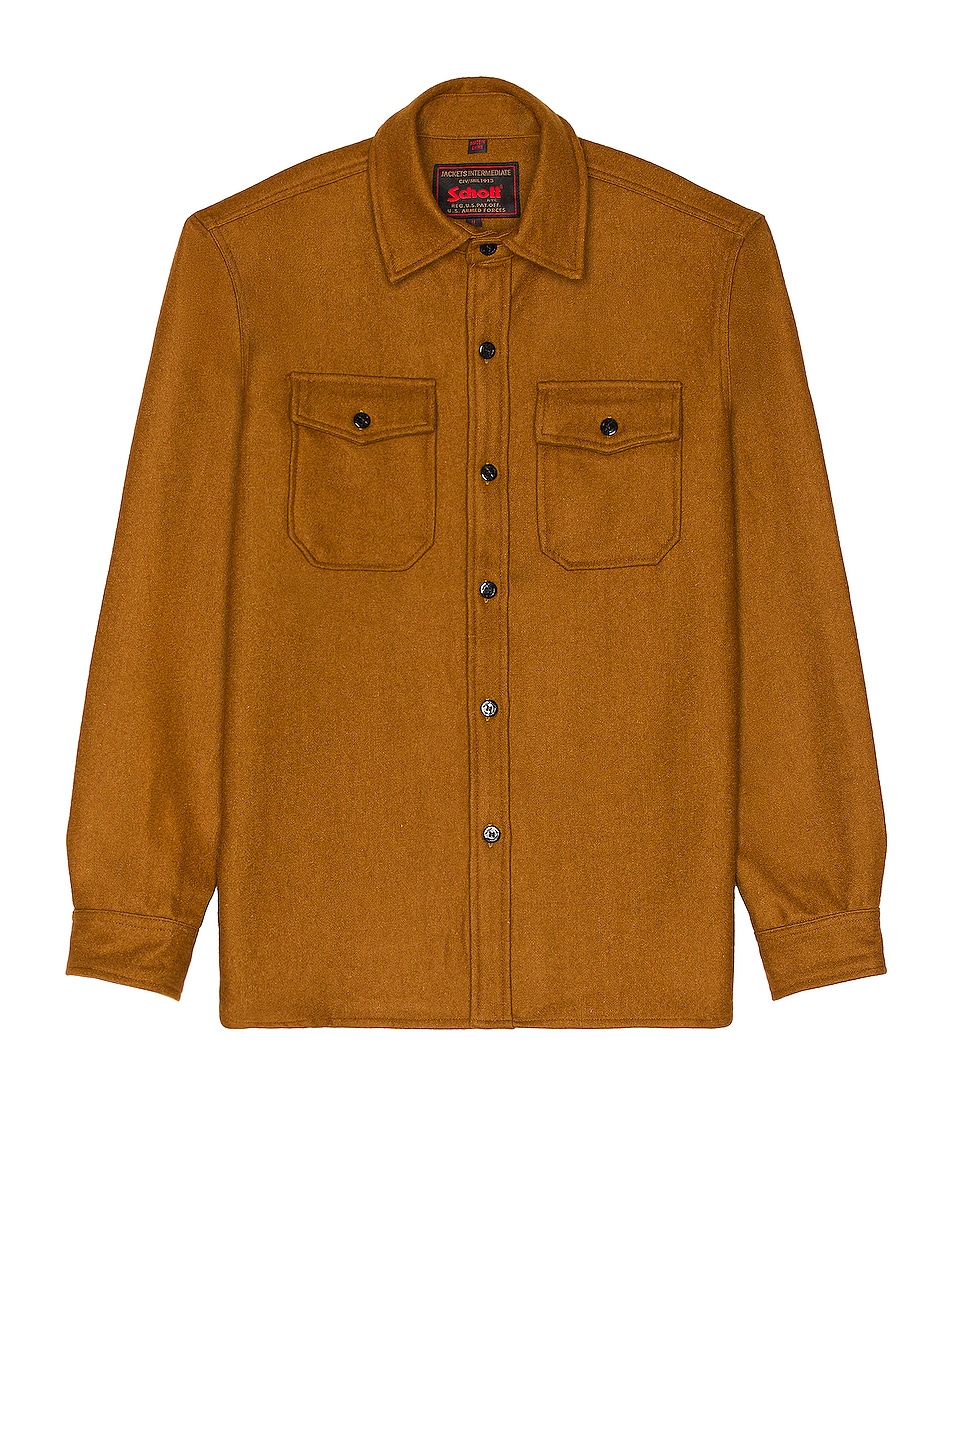 CPO Wool Shirt in Brown